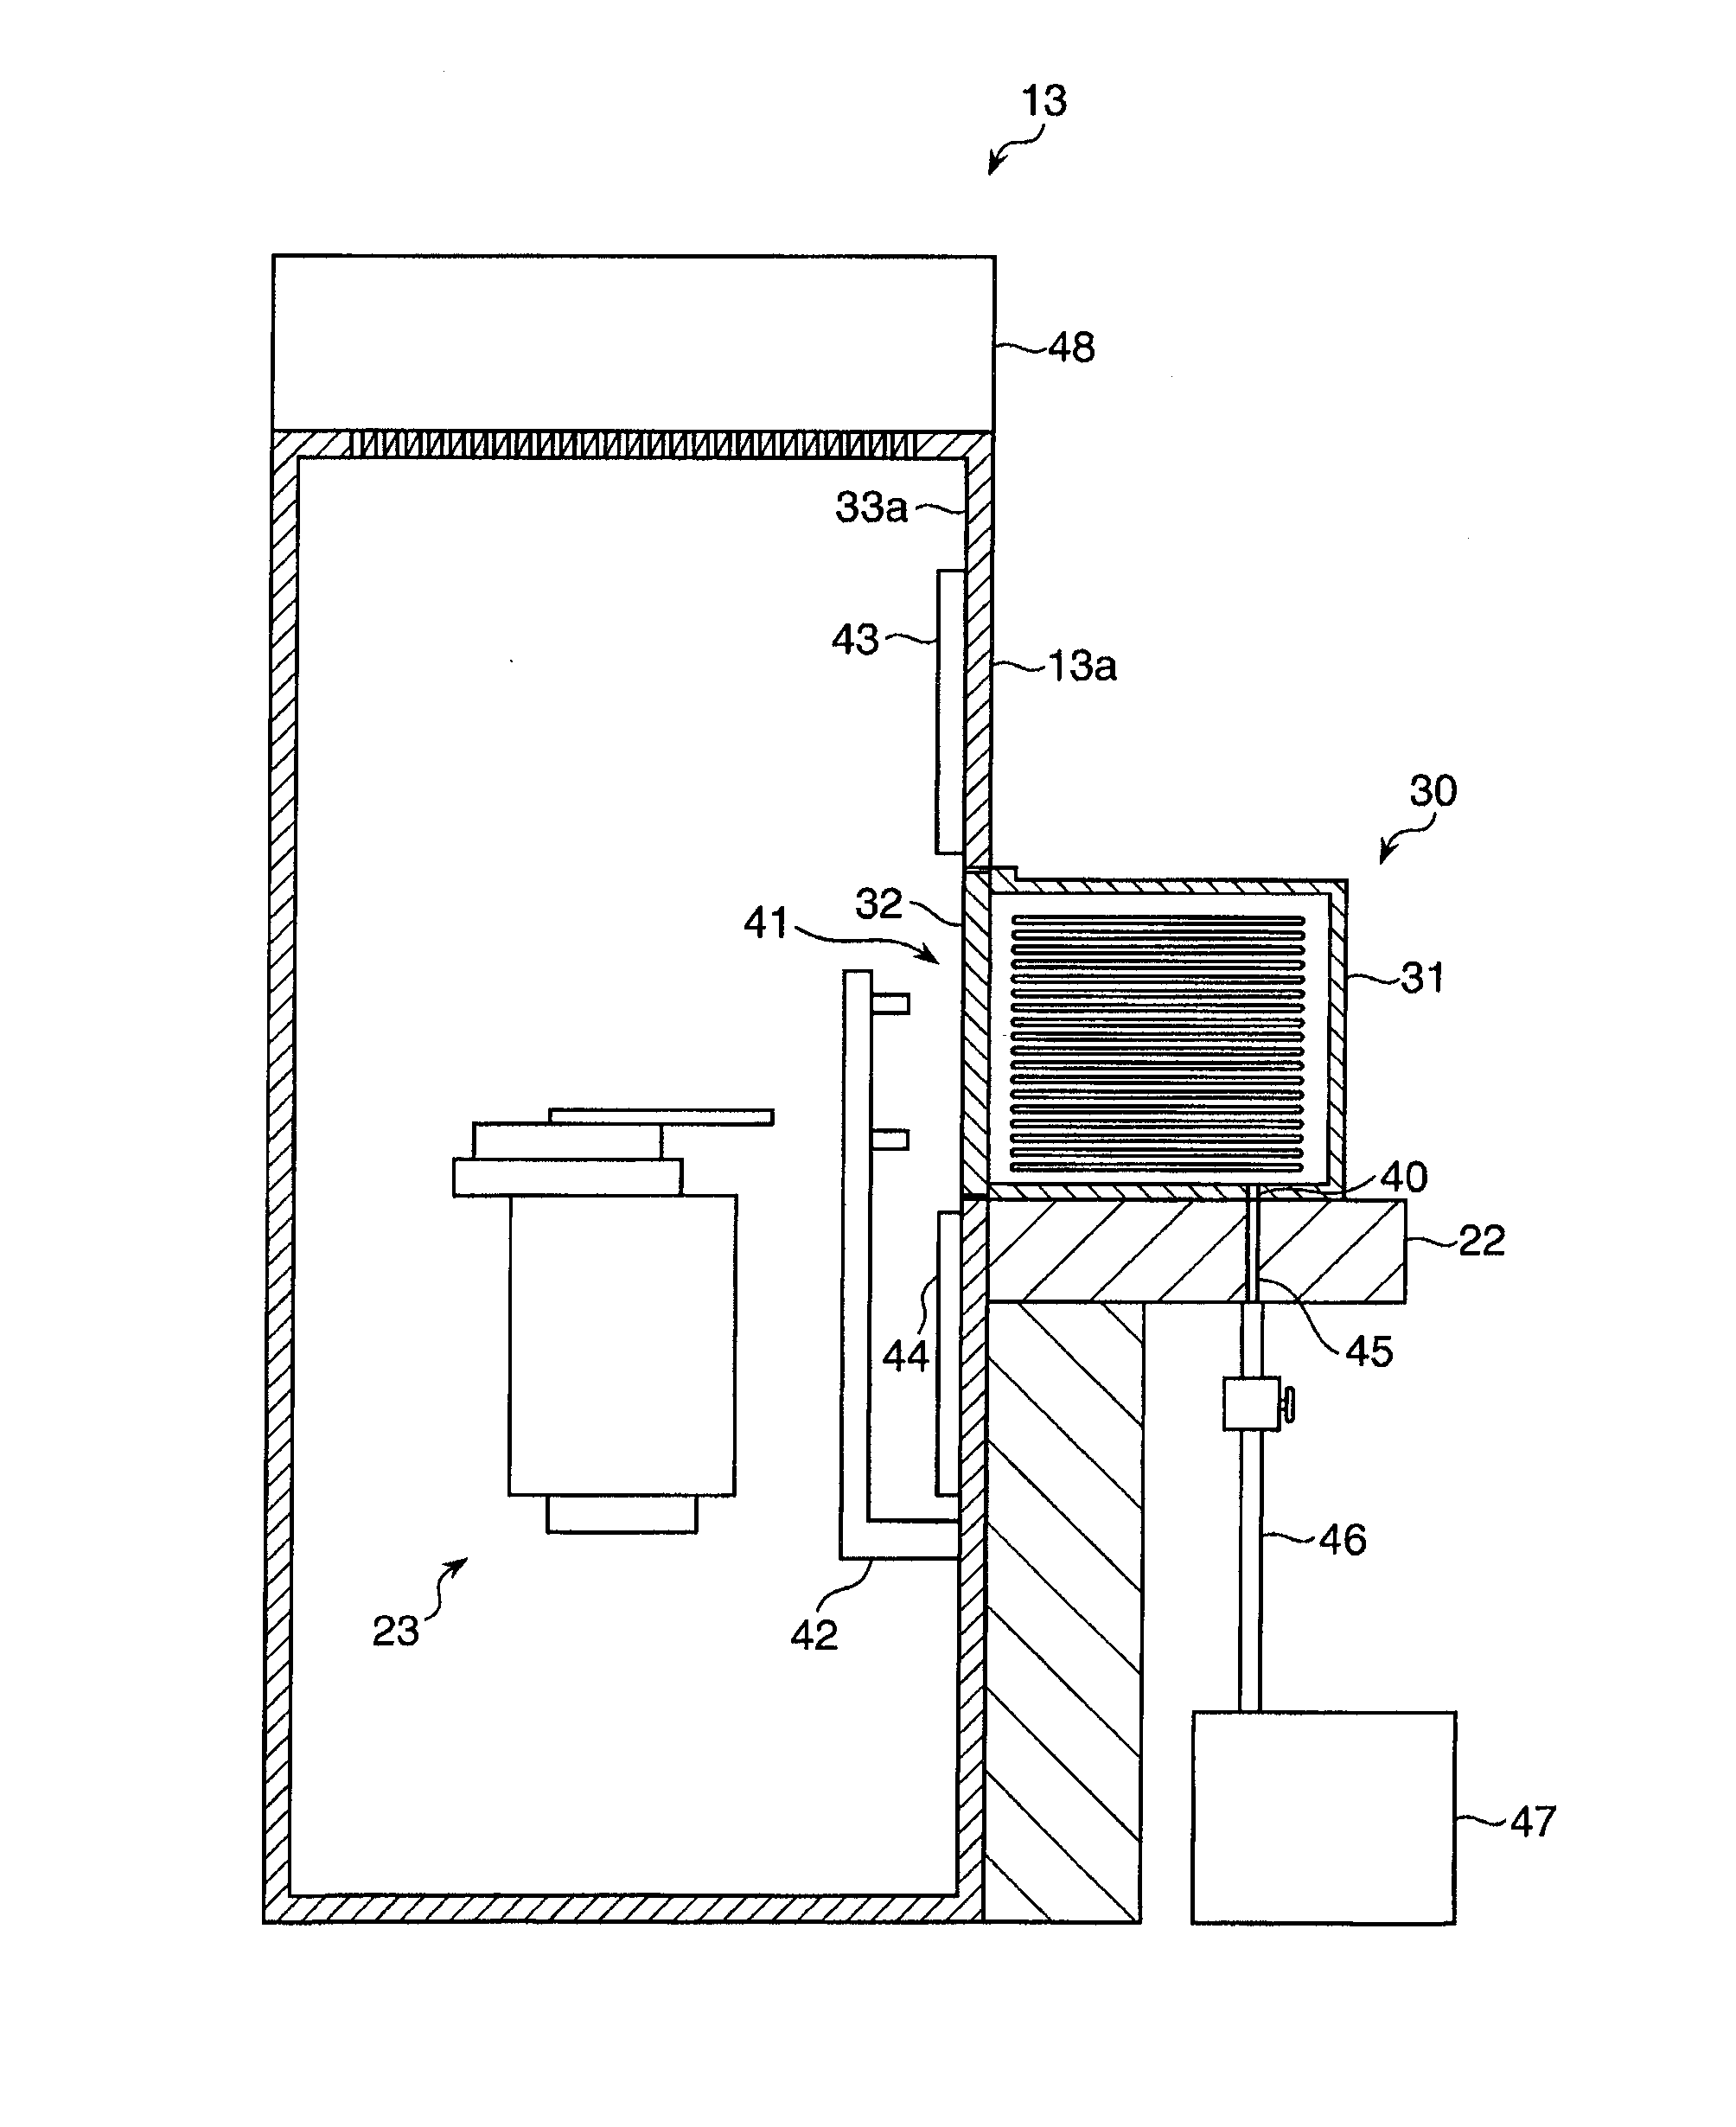 Substrate processing apparatus, cover opening and closing mechanism,shielding mechanism, and method for purging container